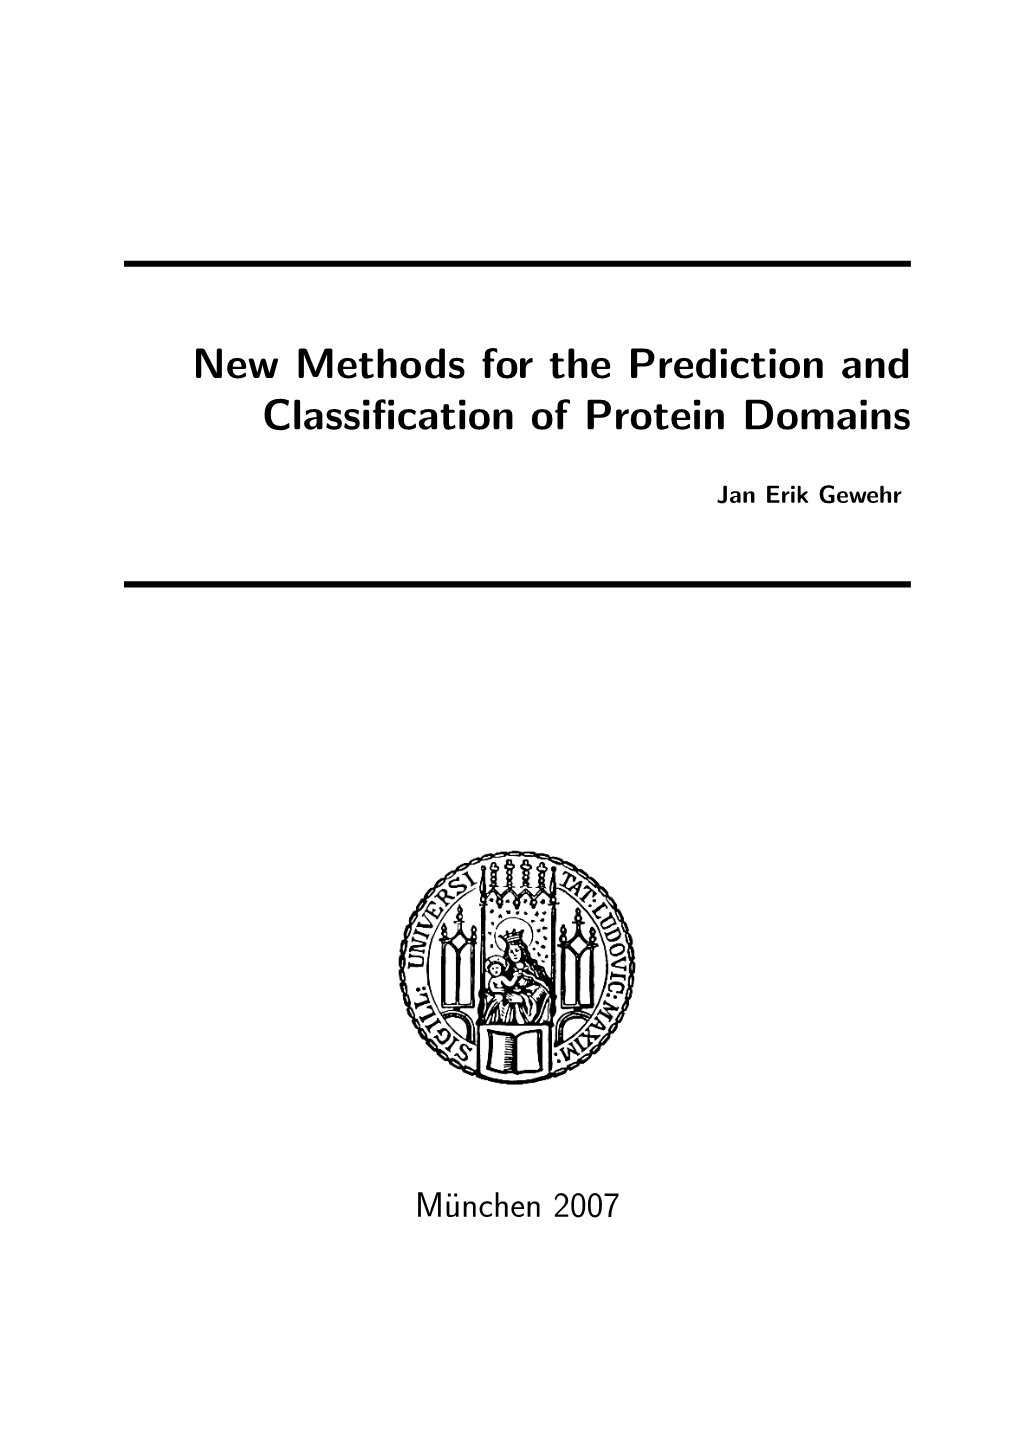 New Methods for the Prediction and Classification of Protein Domains